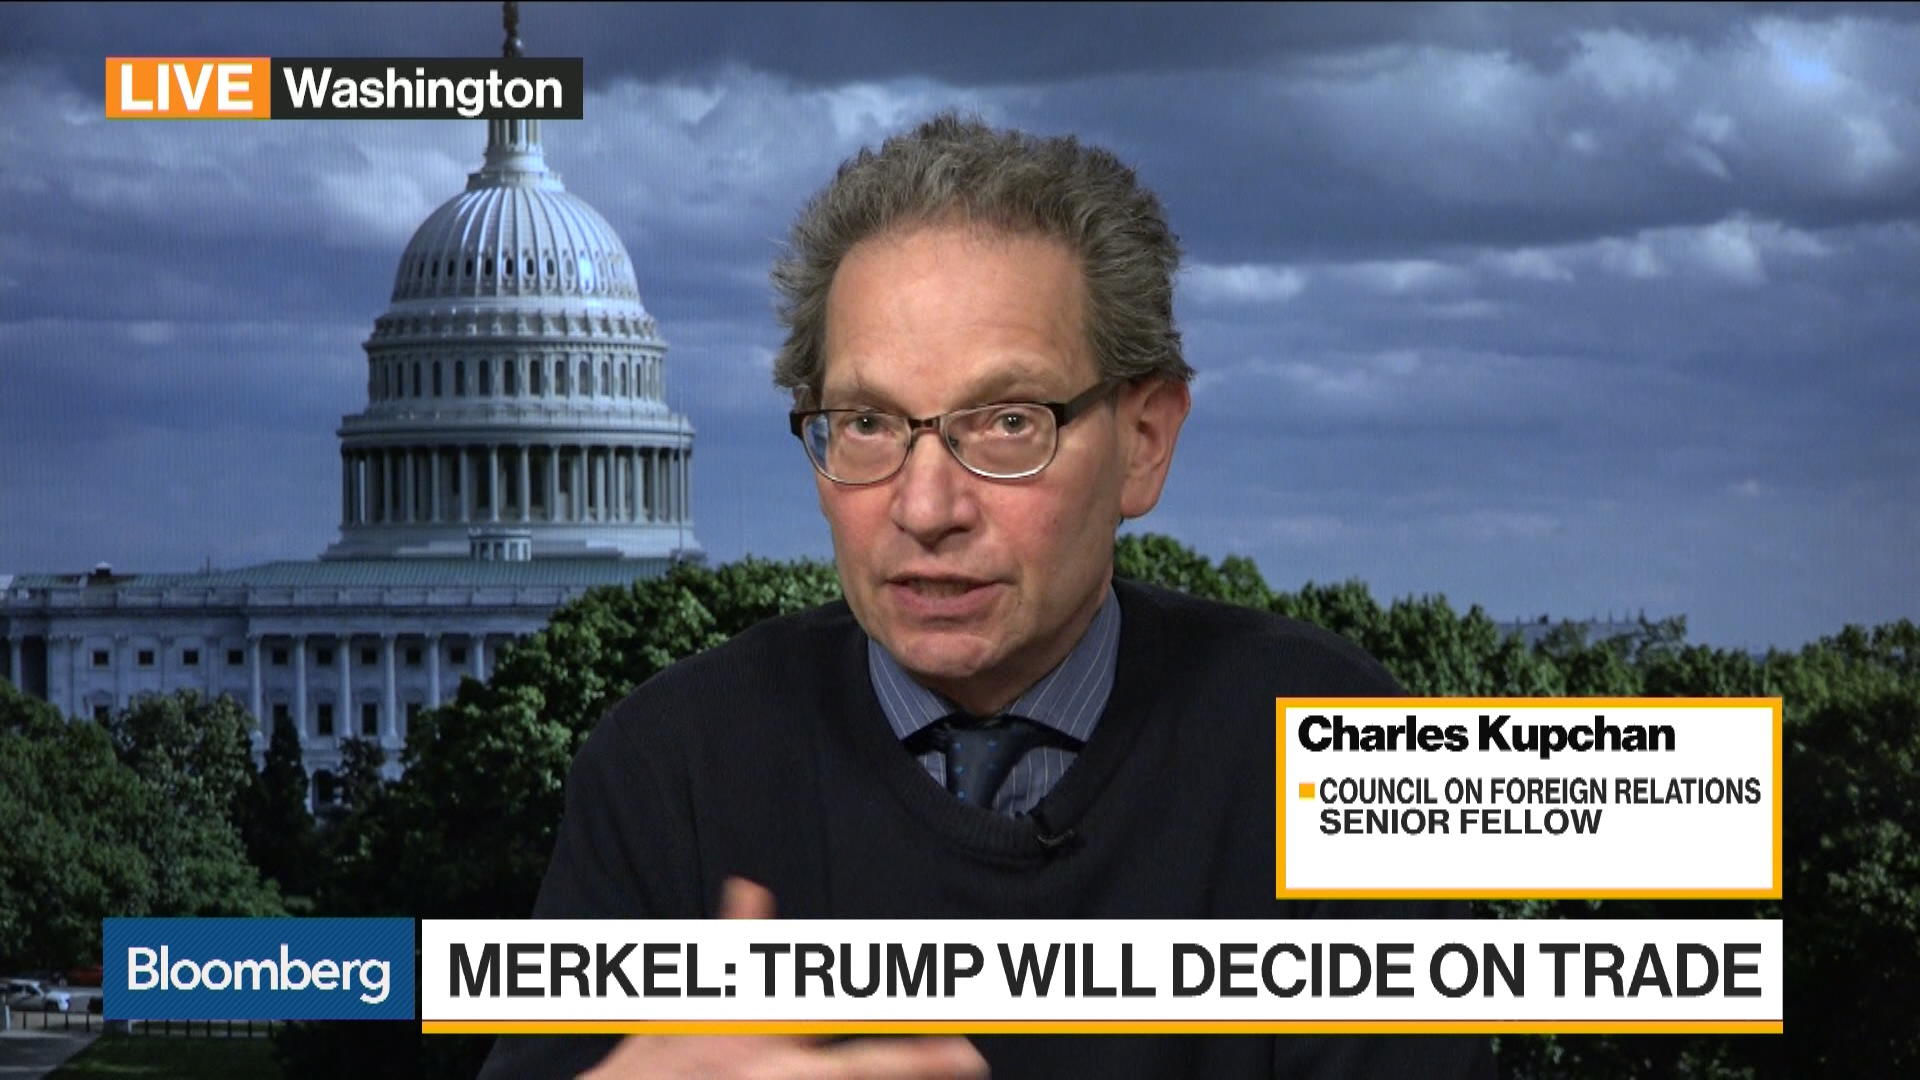 Charles Kupchan Says He's Skeptical About Trade and Iran Issue Relief – Bloomberg1920 x 1080